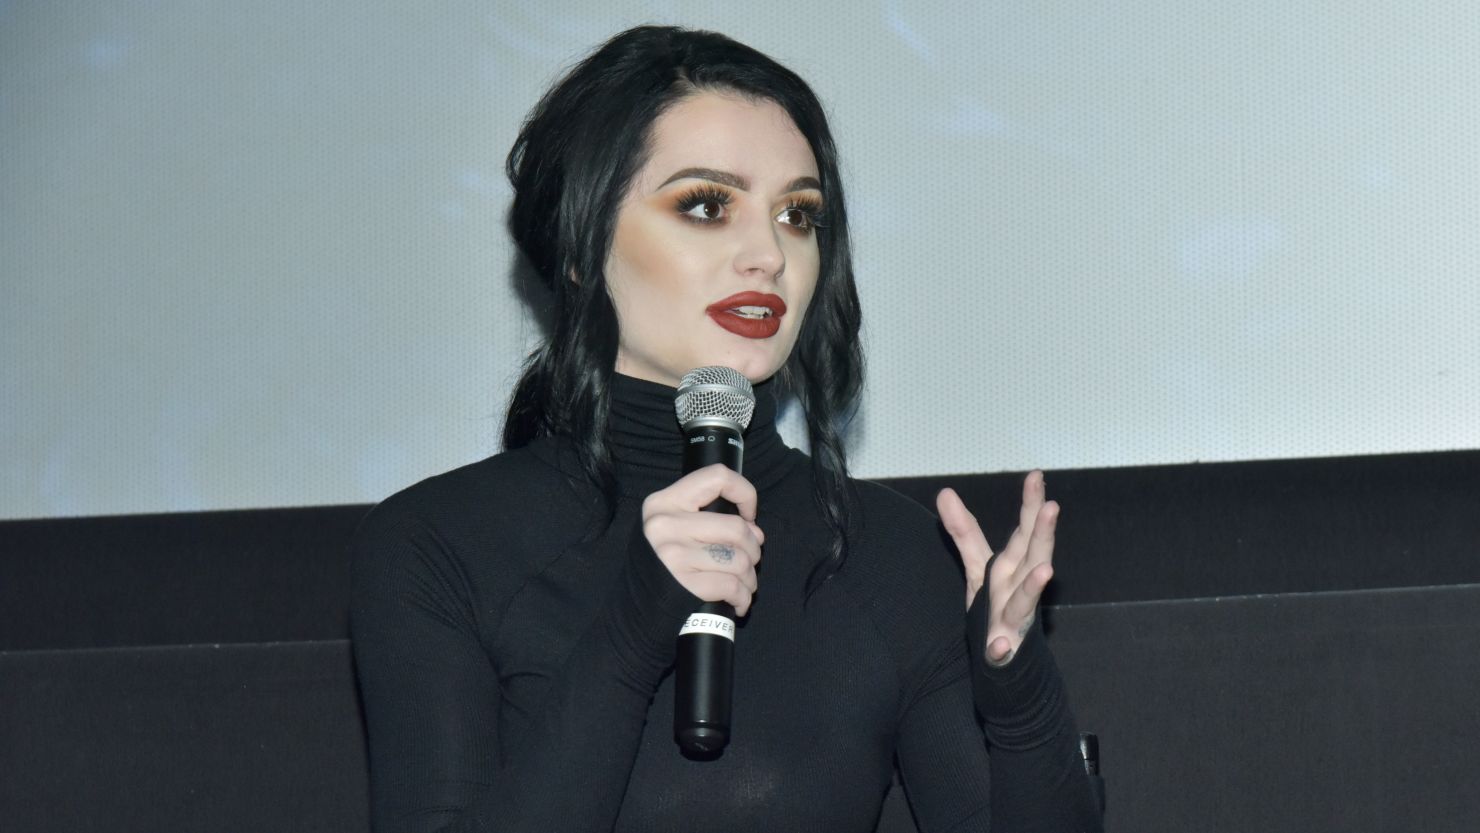 Former WWE Wrestler Paige retired from the ring in 2018.  (Photo by Eugene Gologursky/Getty Images for MGM Studios)